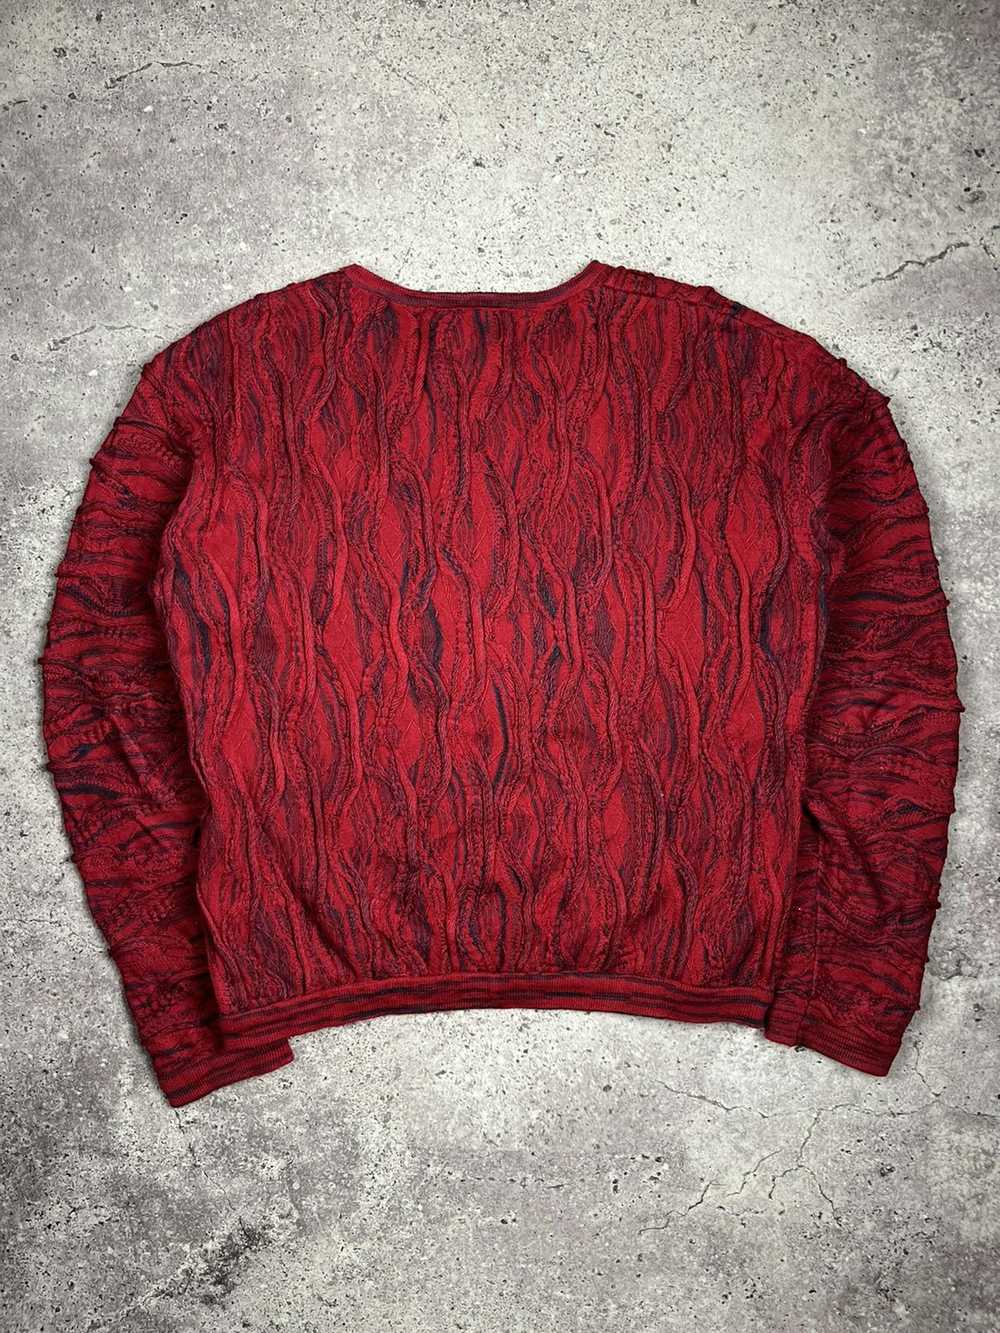 Coloured Cable Knit Sweater × Coogi × Vintage Pur… - image 3